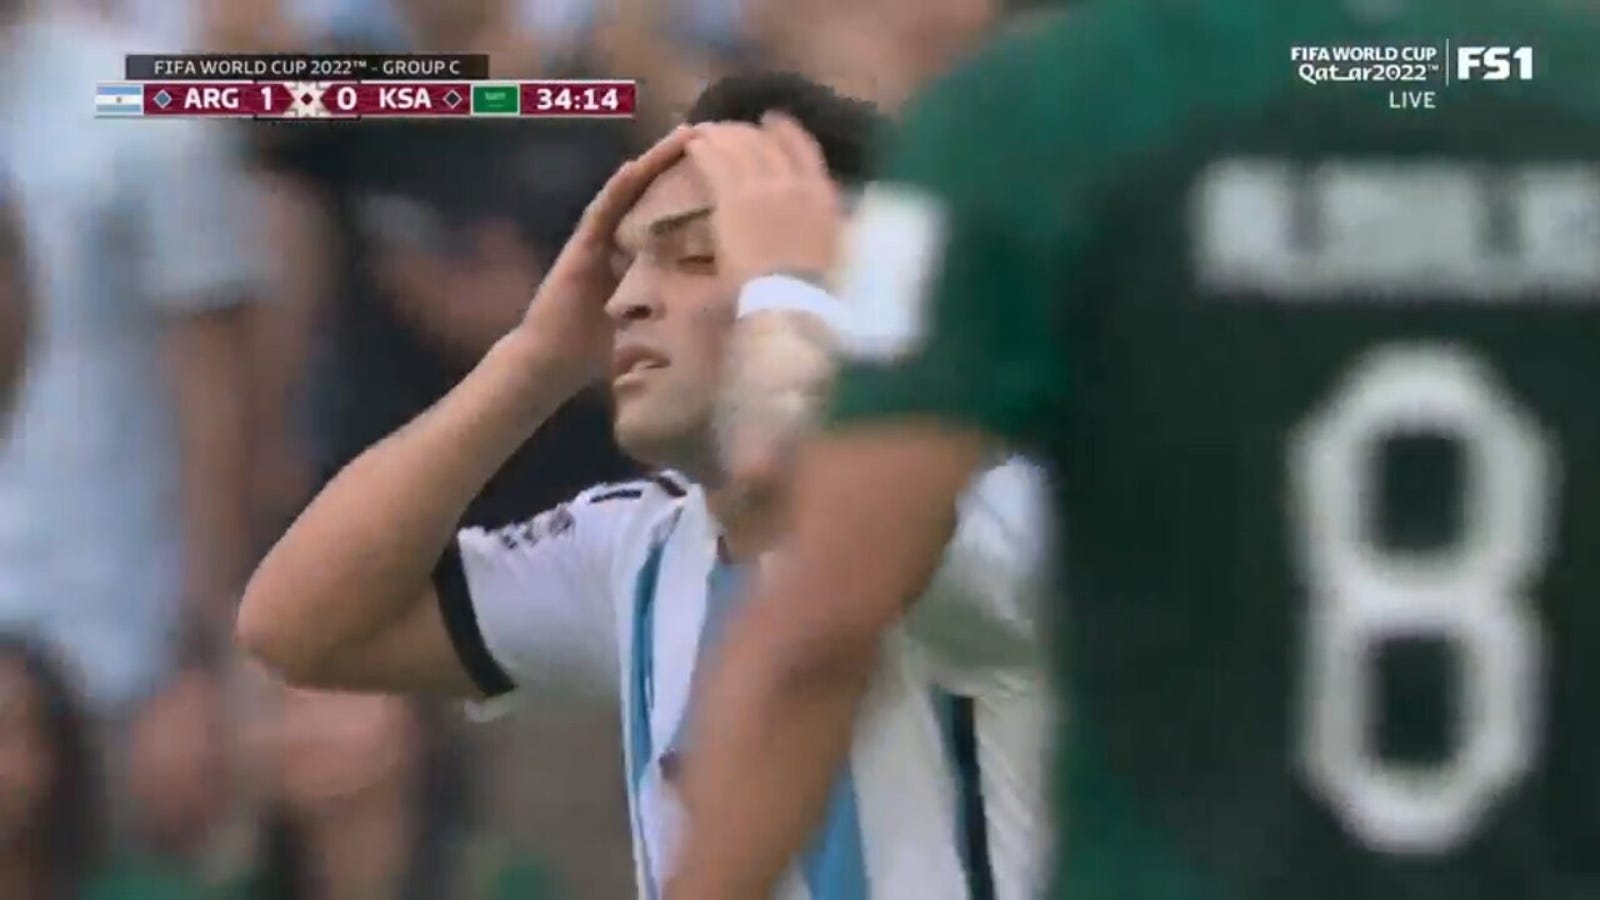 Argentina were caught offside a total of seven times in the first half against Saudi Arabia